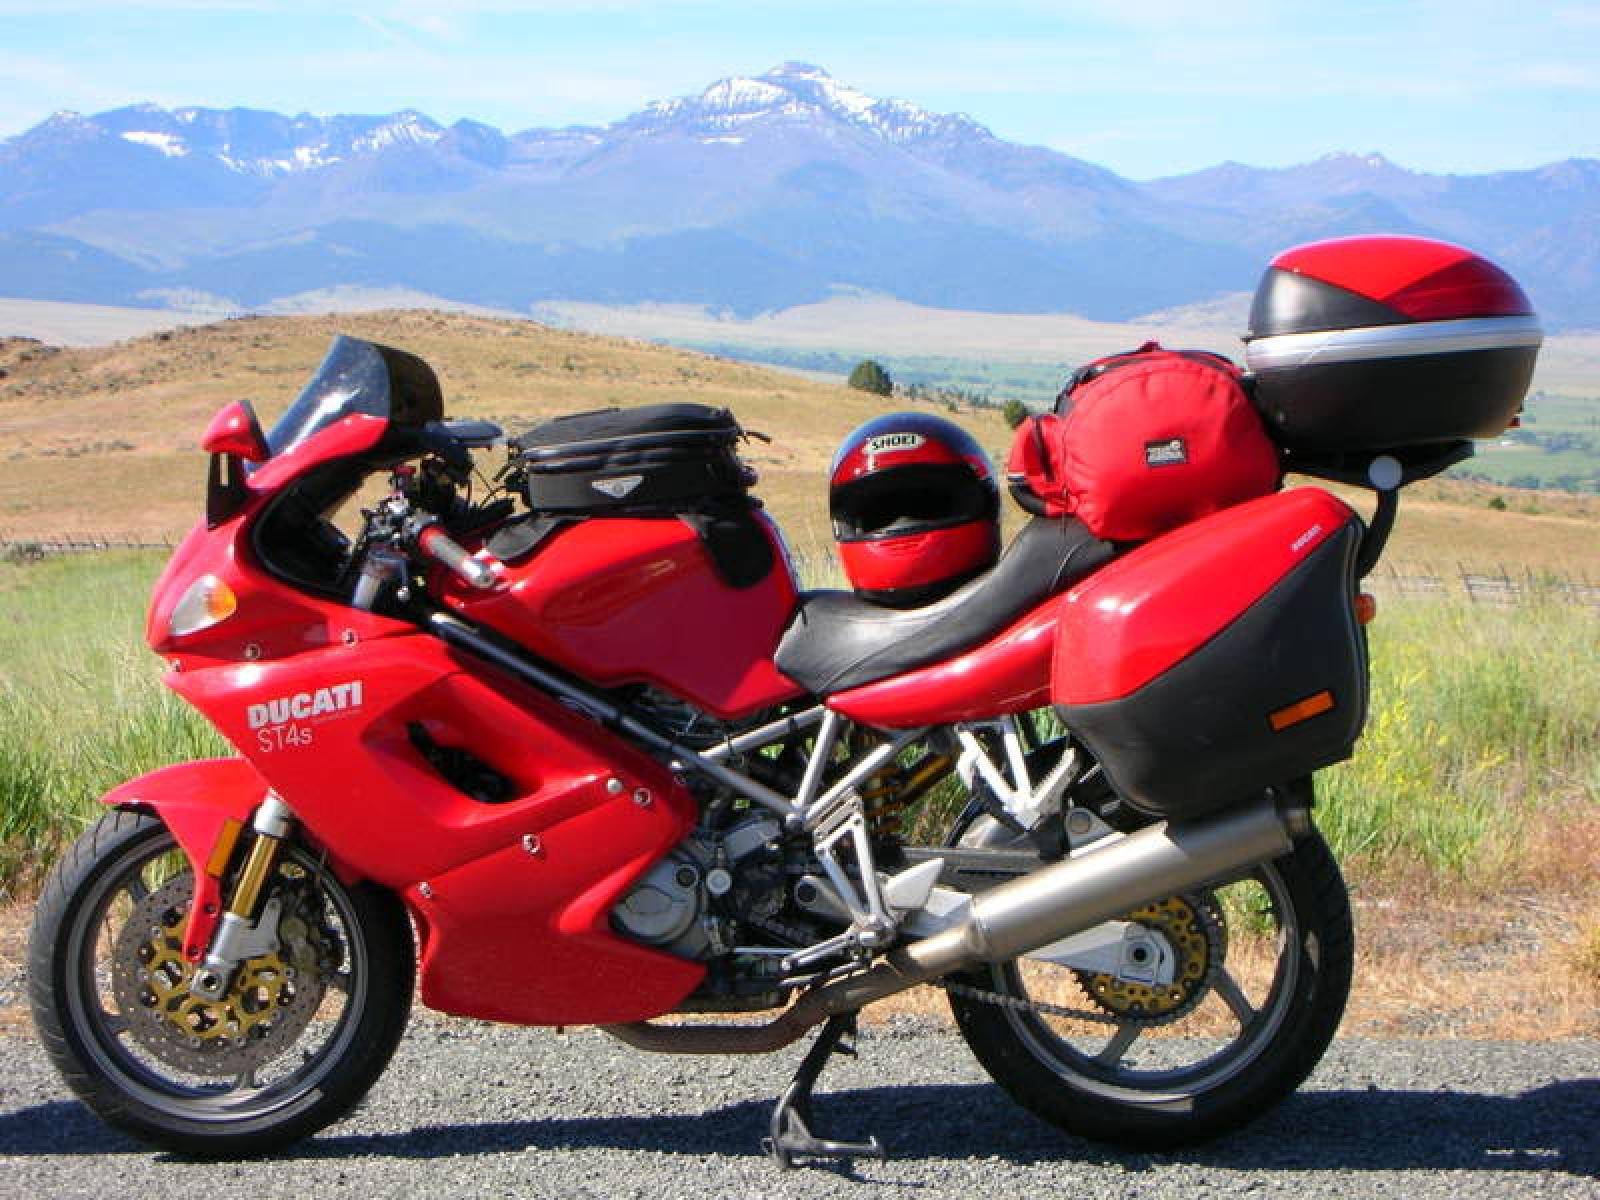 Ducati st4 & st4s (1998-2006): review & buying guide